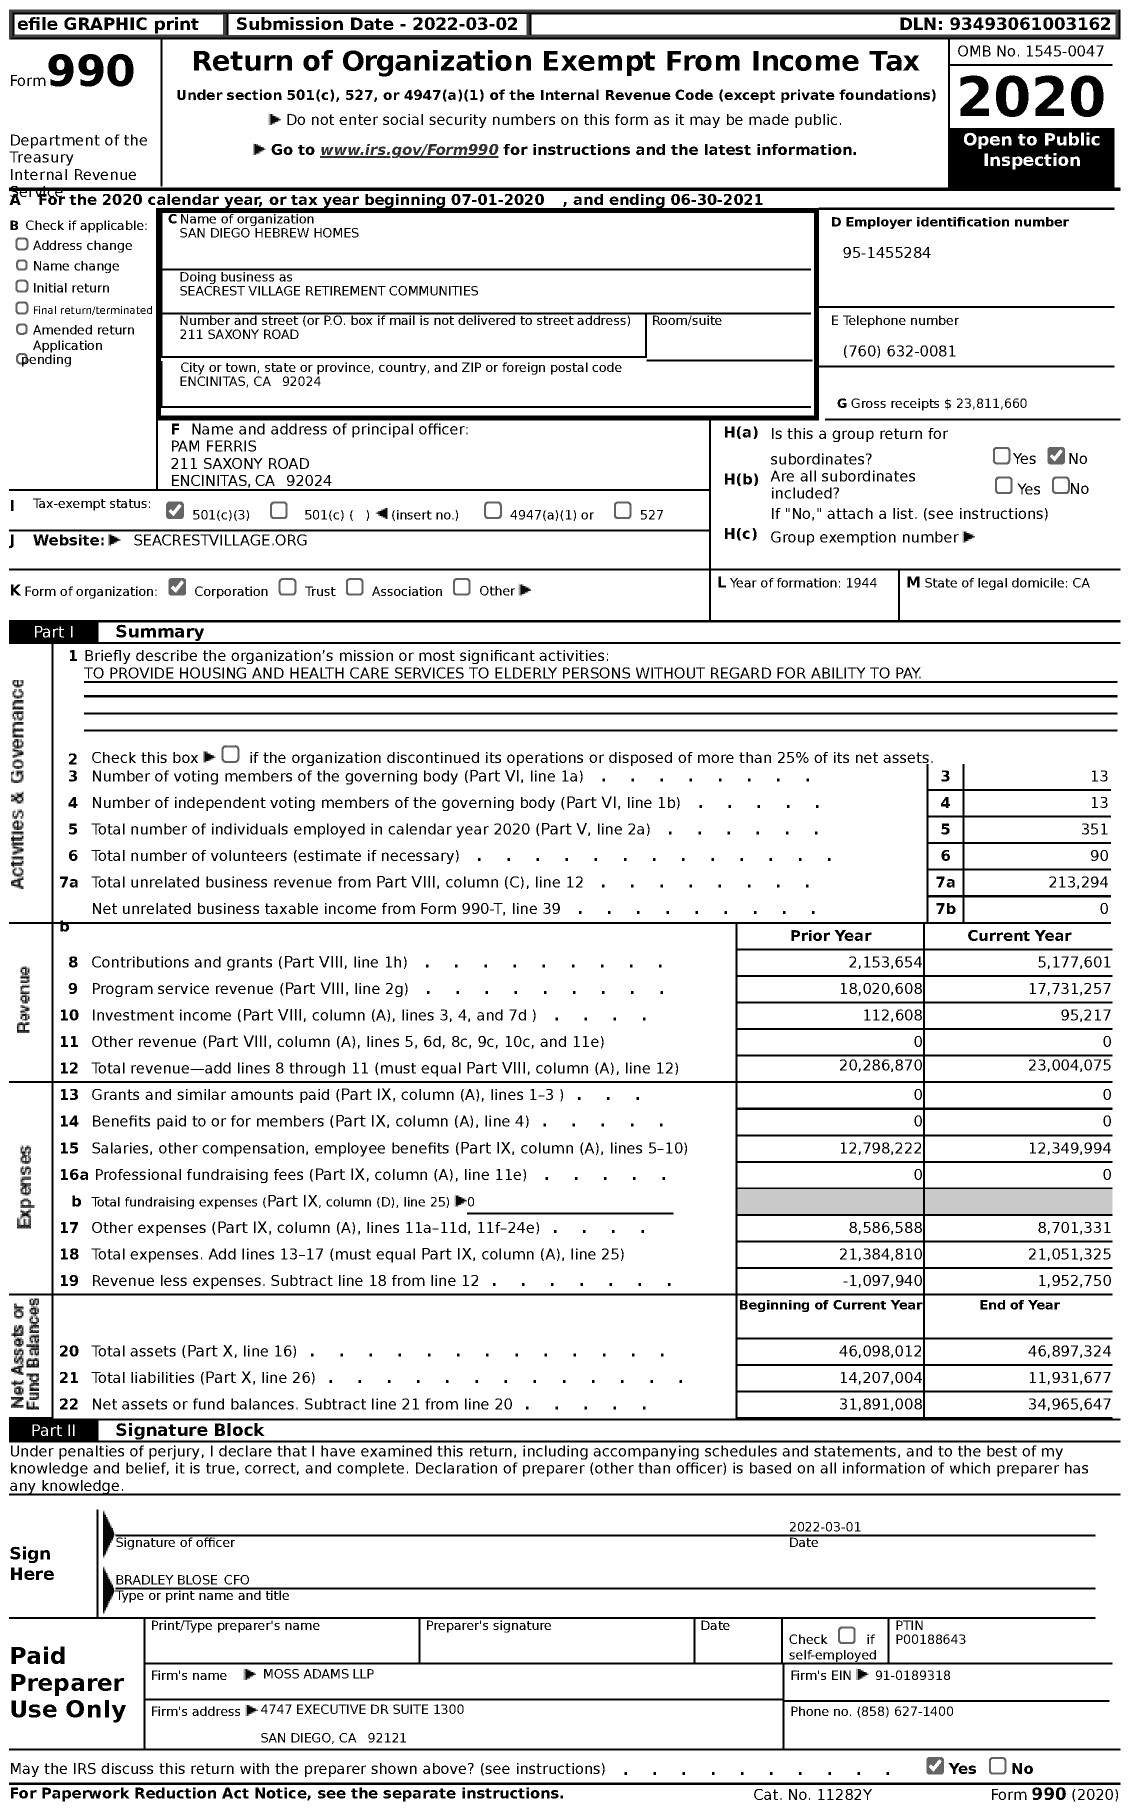 Image of first page of 2020 Form 990 for Seacrest Village Retirement Communities / San Diego Hebrew Homes